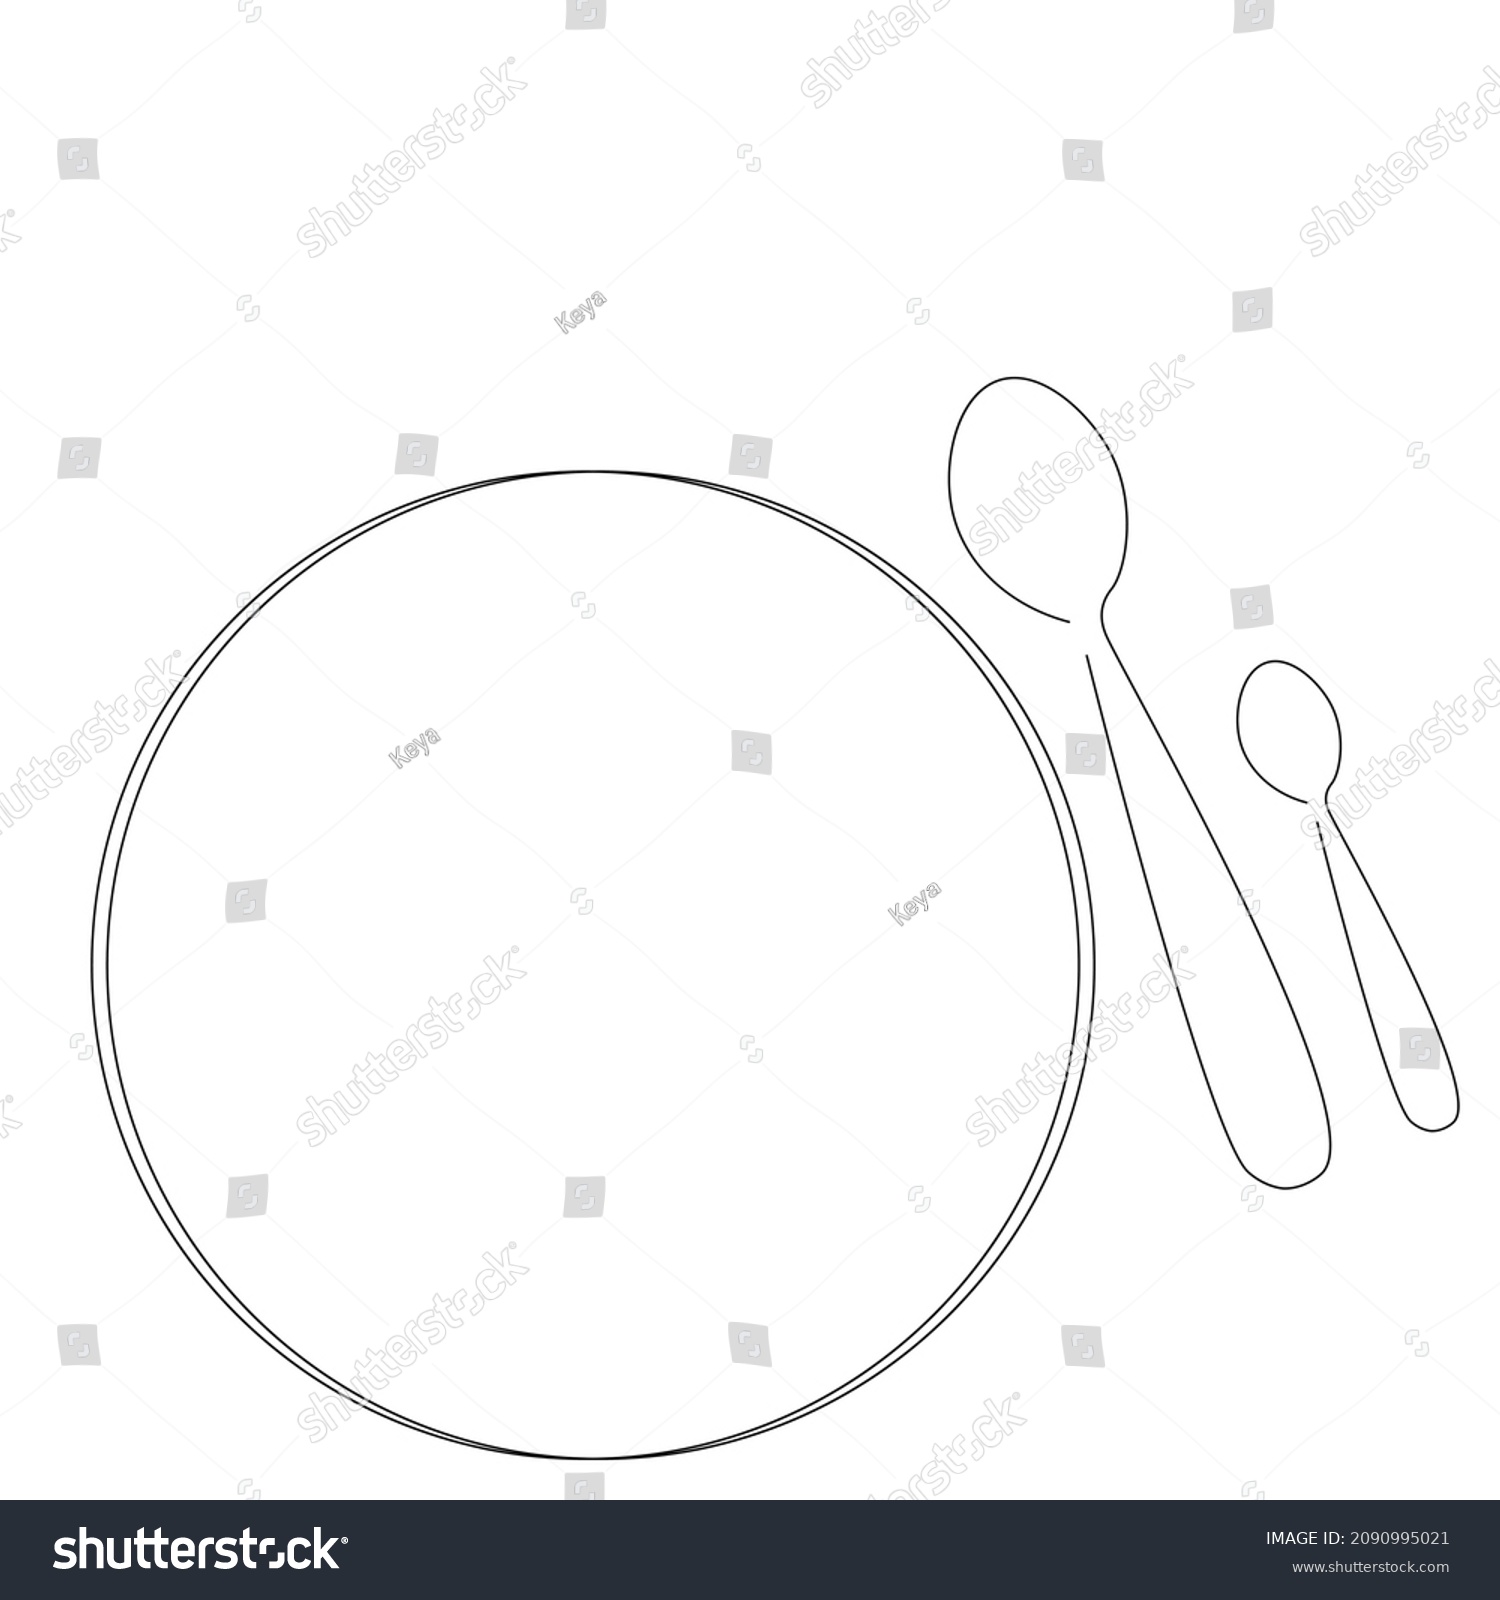 Spoon Silhouette Line Drawing Vector Illustration Stock Vector (Royalty ...